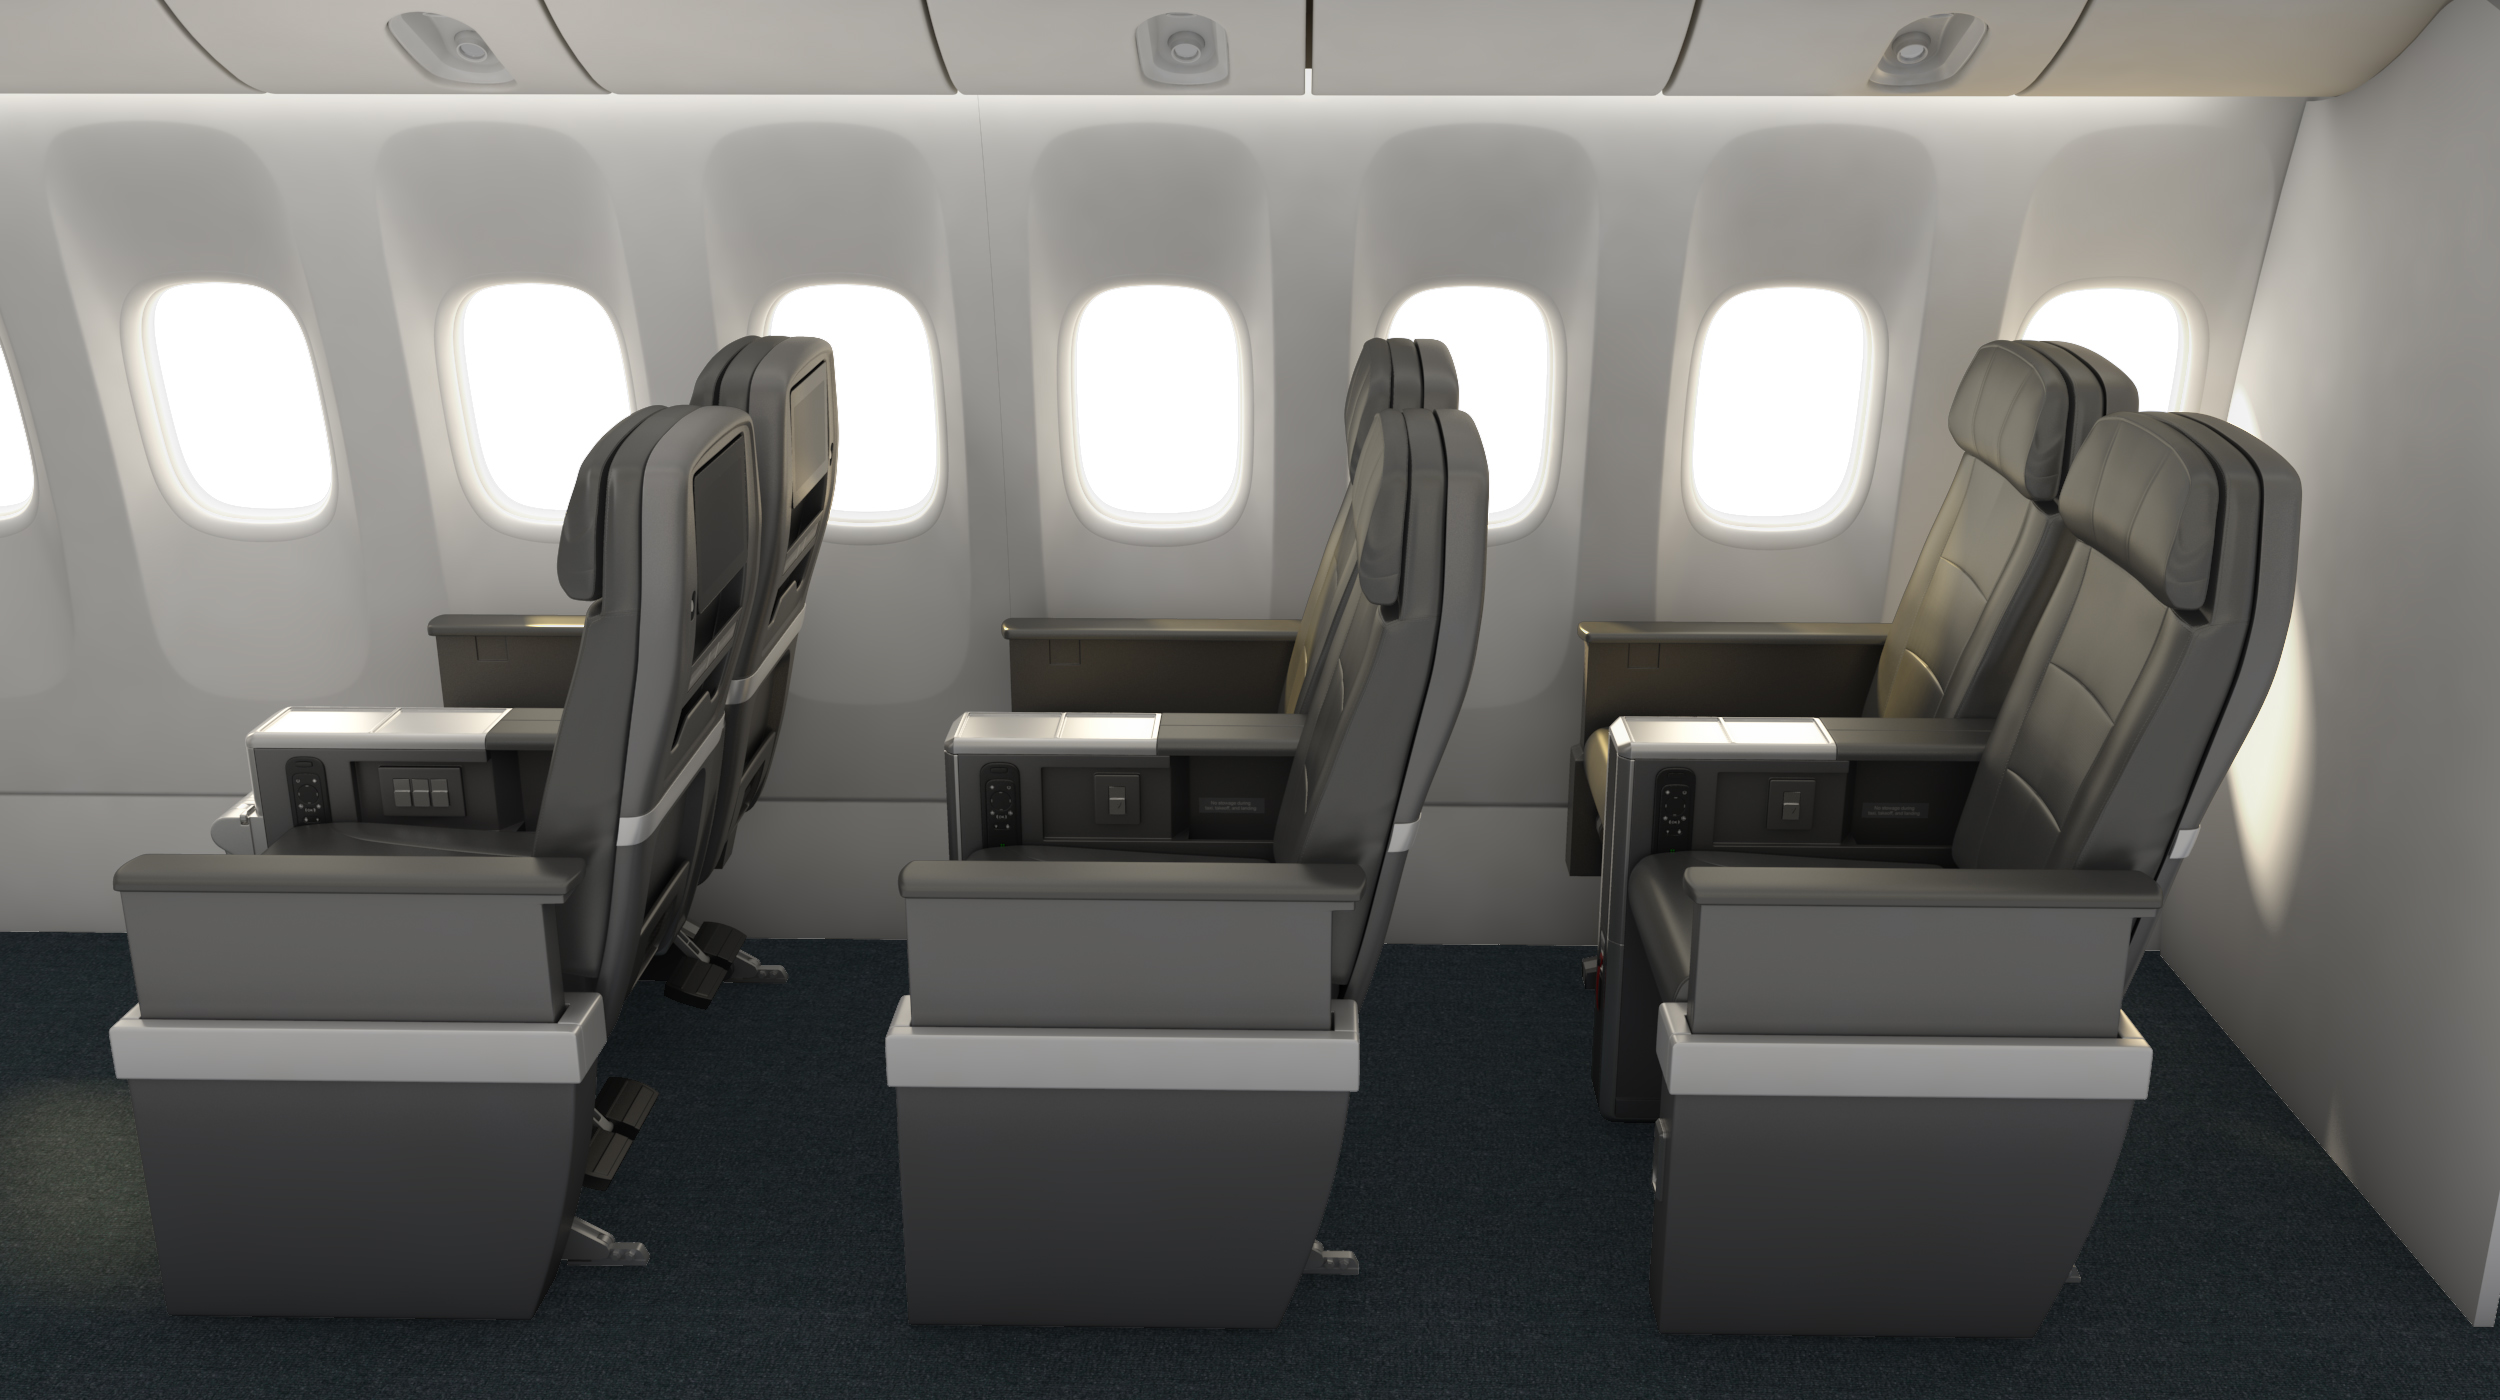 American Airlines Just Announced Premium Economy And There’s Already A Strategy For Proper Seat Selection